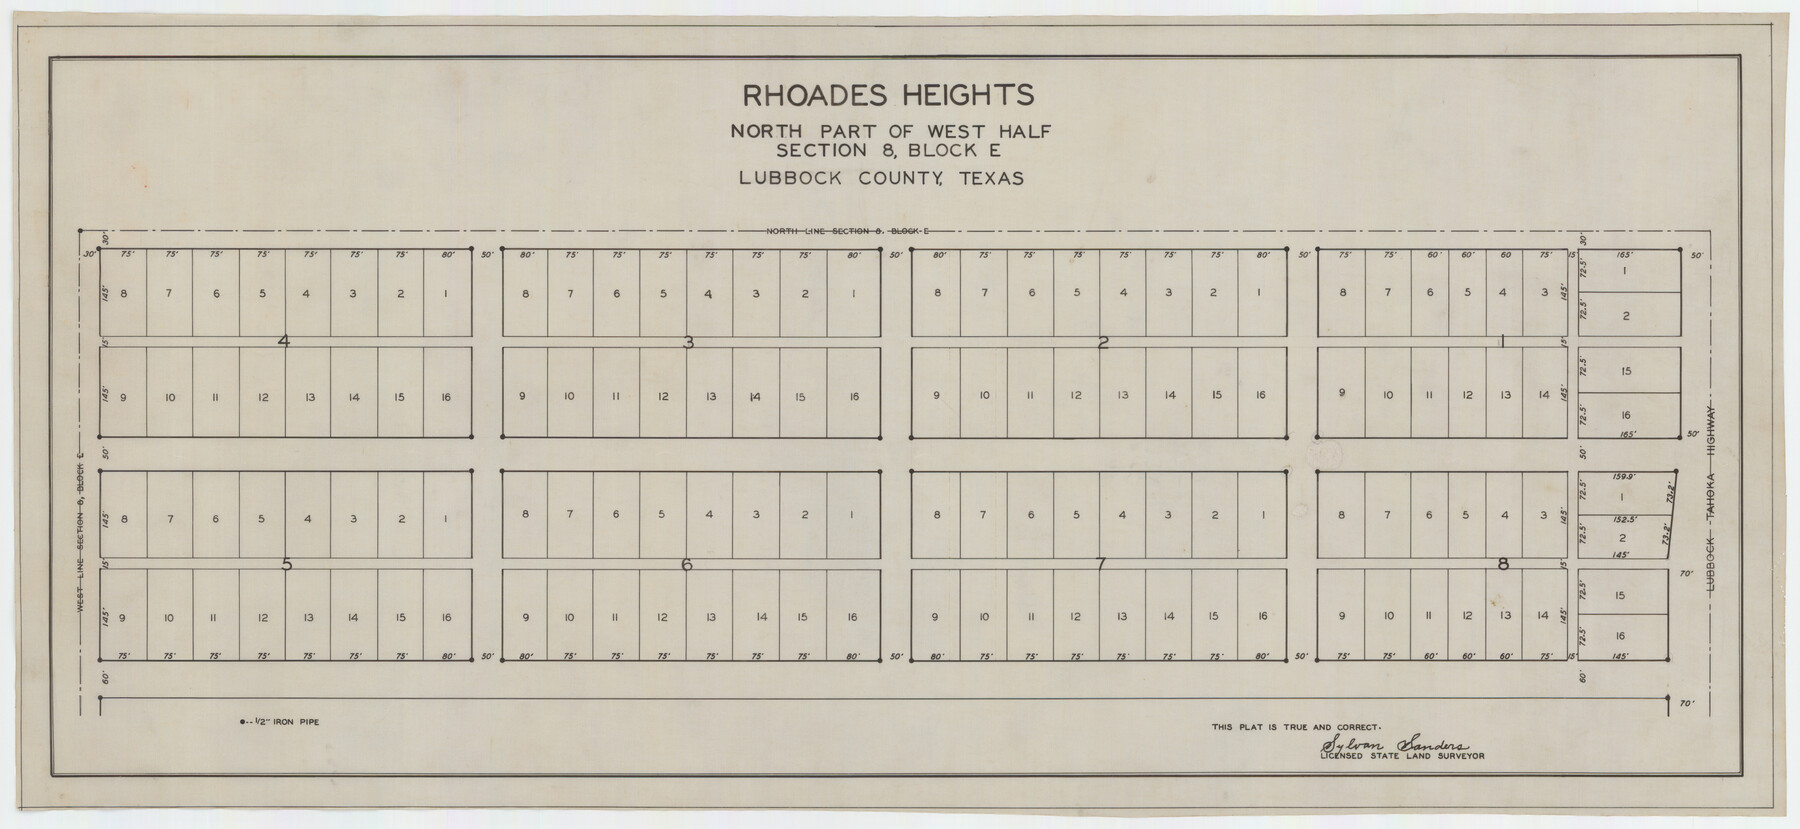 92759, Rhoades Heights, North Part of West Half, Section 8, Block E, Twichell Survey Records